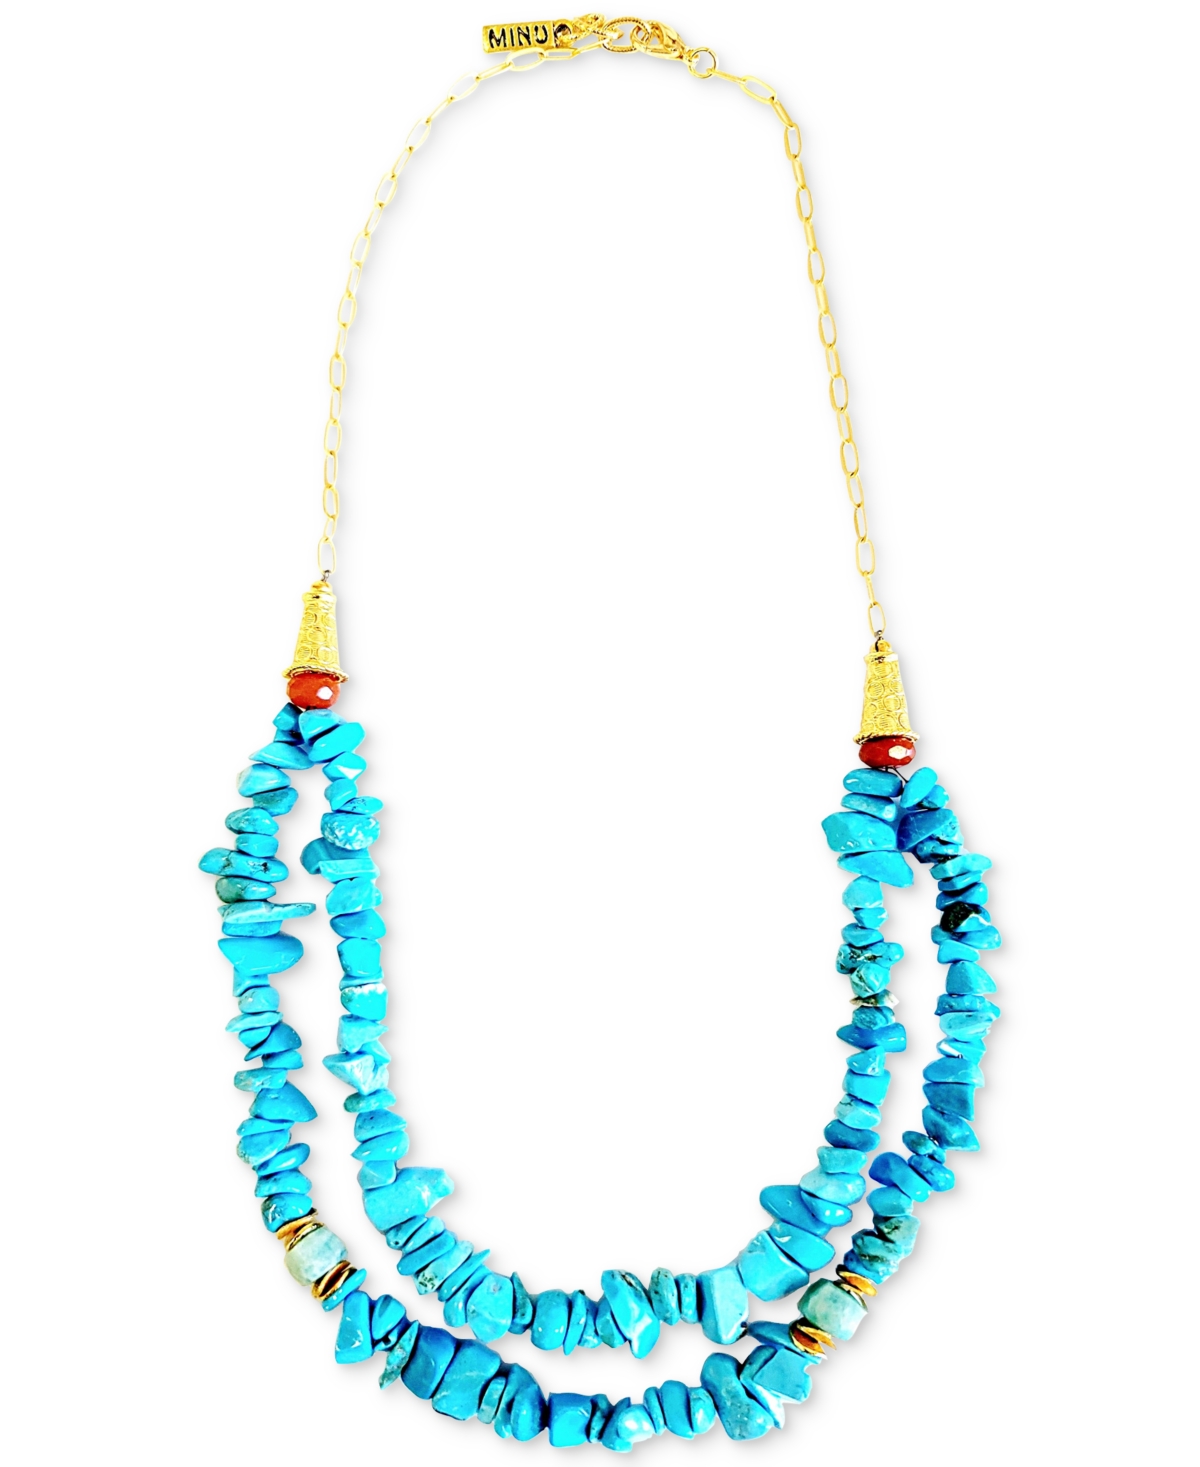 Gold-Tone Amazonite & Turquoise Beaded Double-Row Statement Necklace, 16" + 2" extender - Gold Turquoise